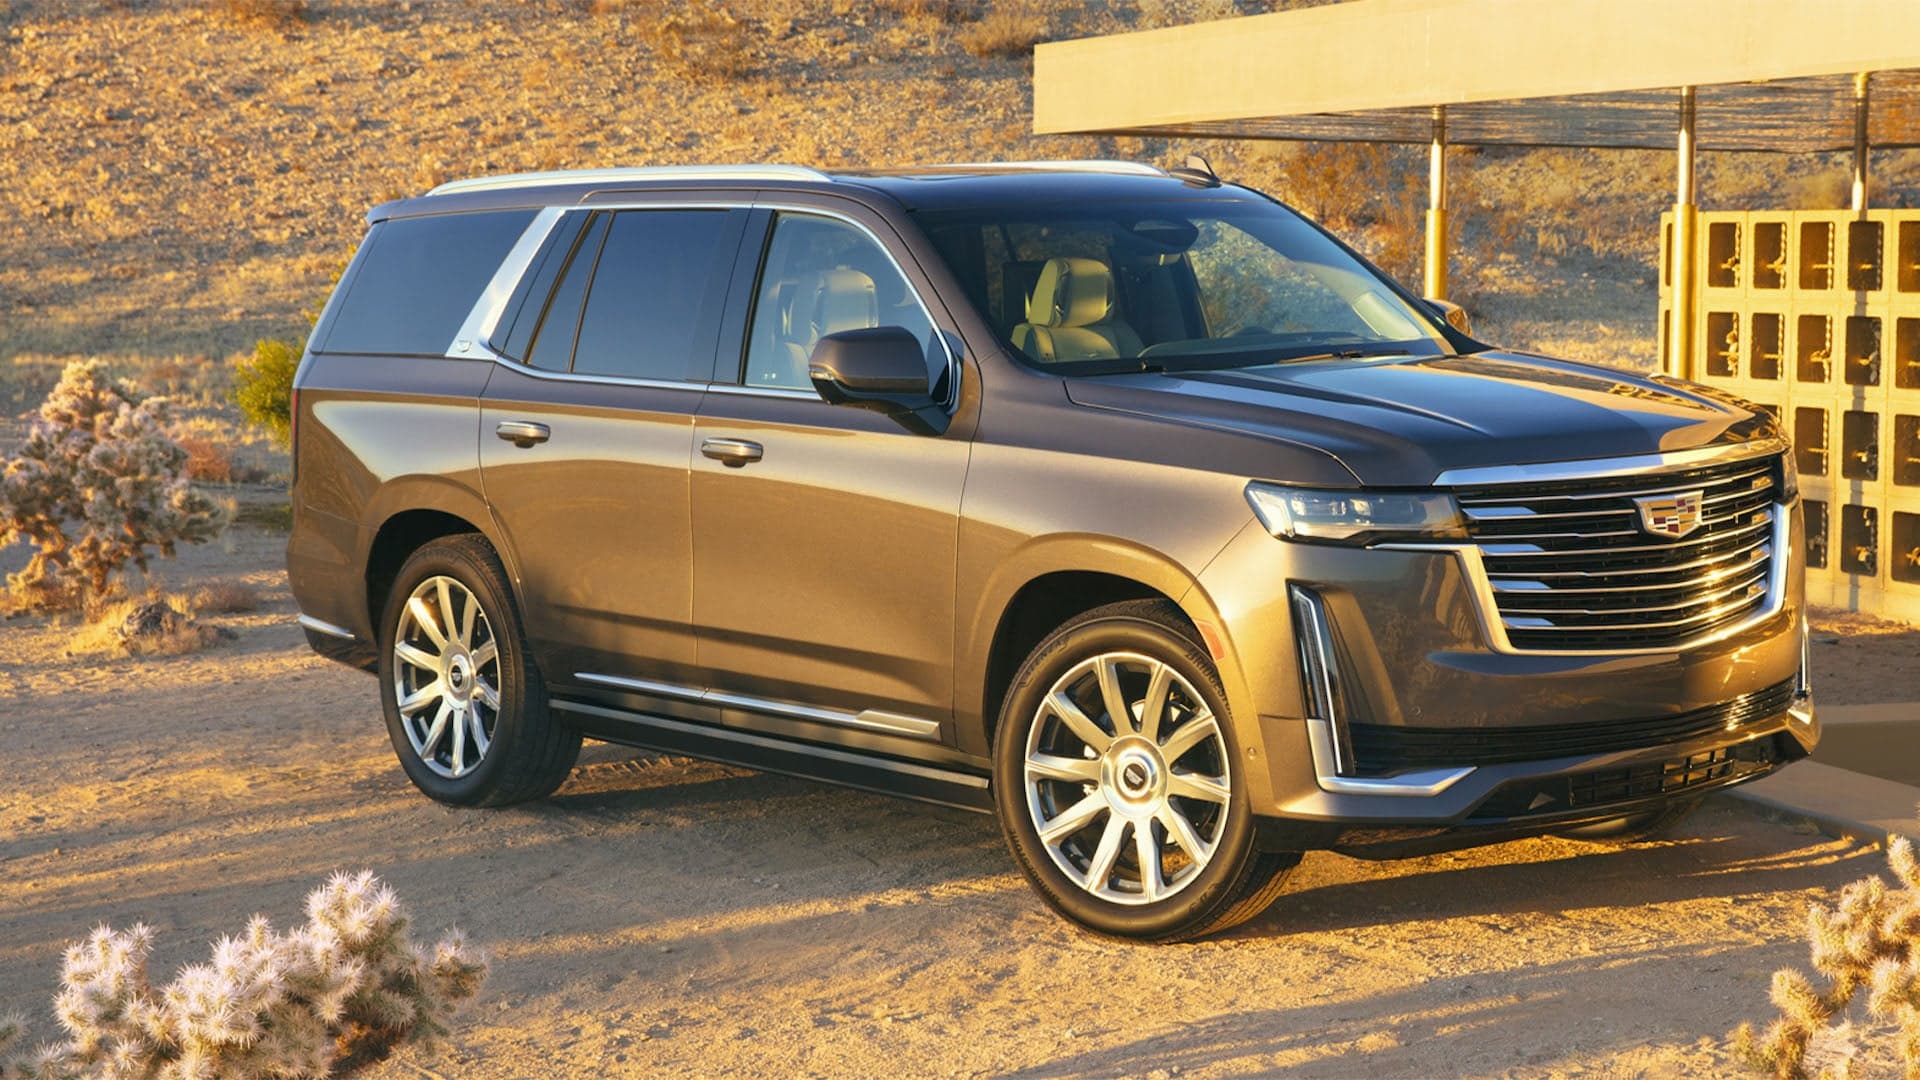 The New 2021 Cadillac Escalade Abounds with Executive-Style Excess